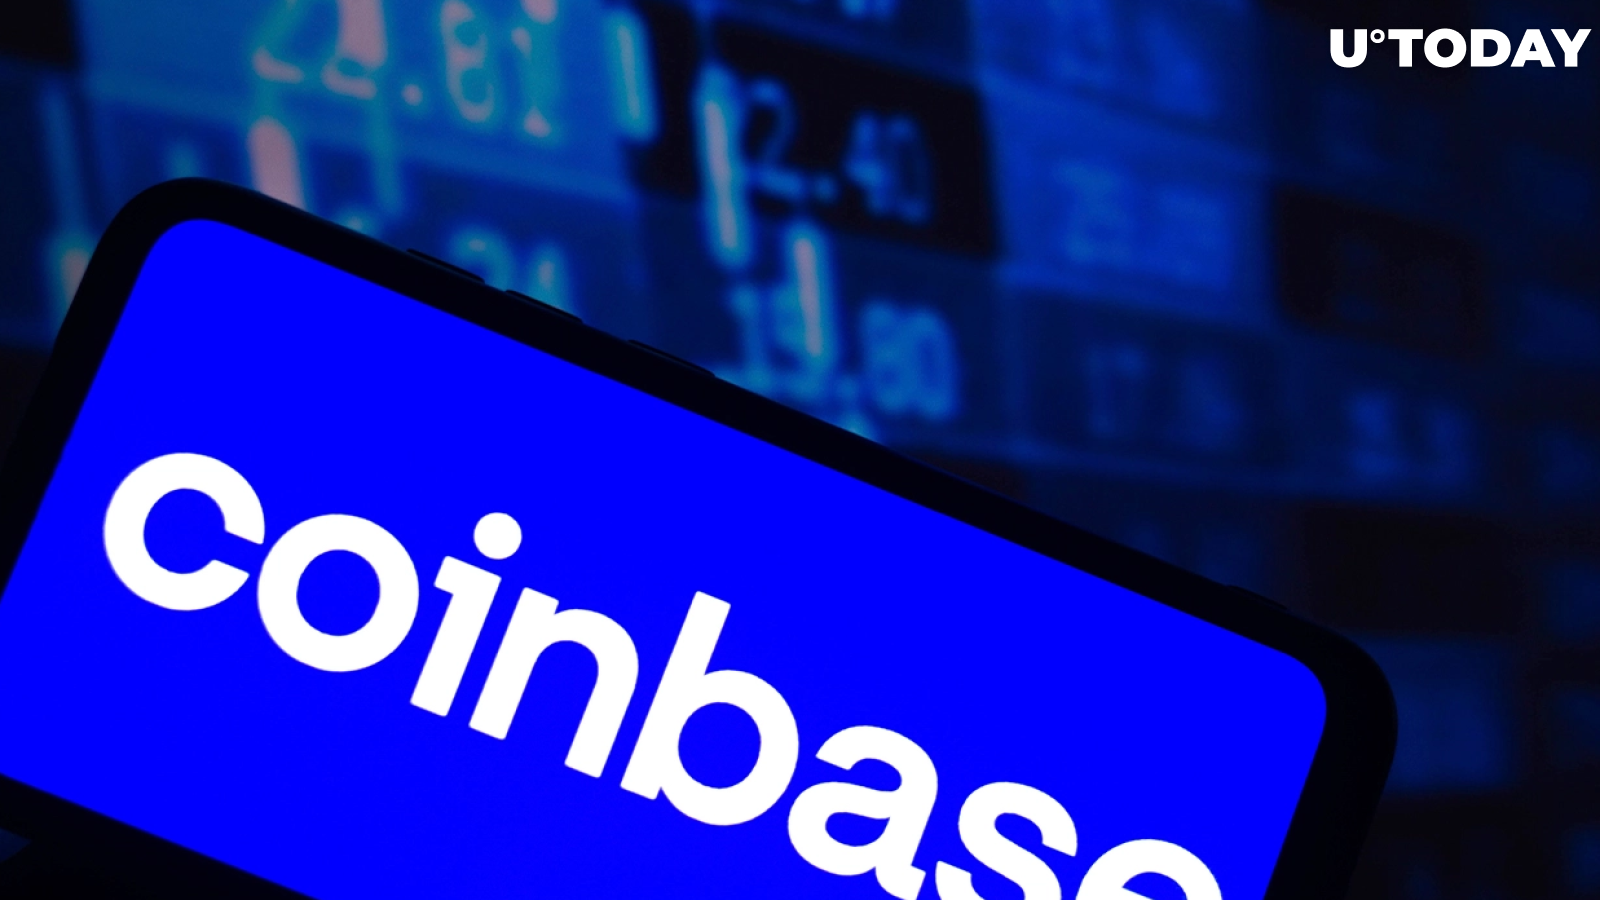 Coinbase Says Some Customers Are Having Issues Accessing Accounts